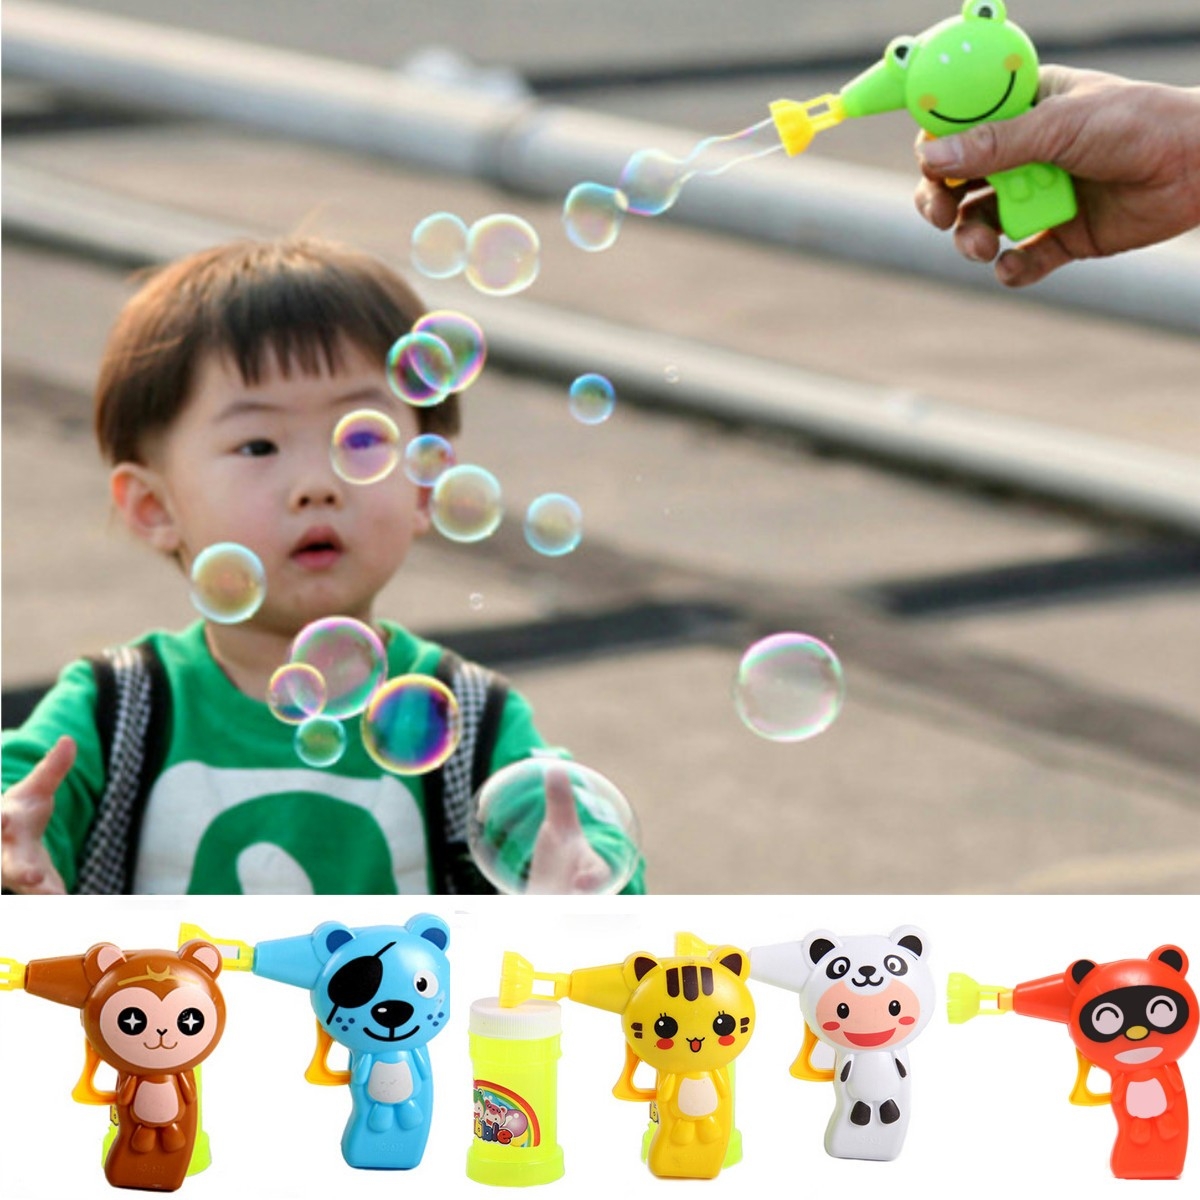 Kid Automatic Bubble Blaster Maker Blower Gun Toy With Different Patterns